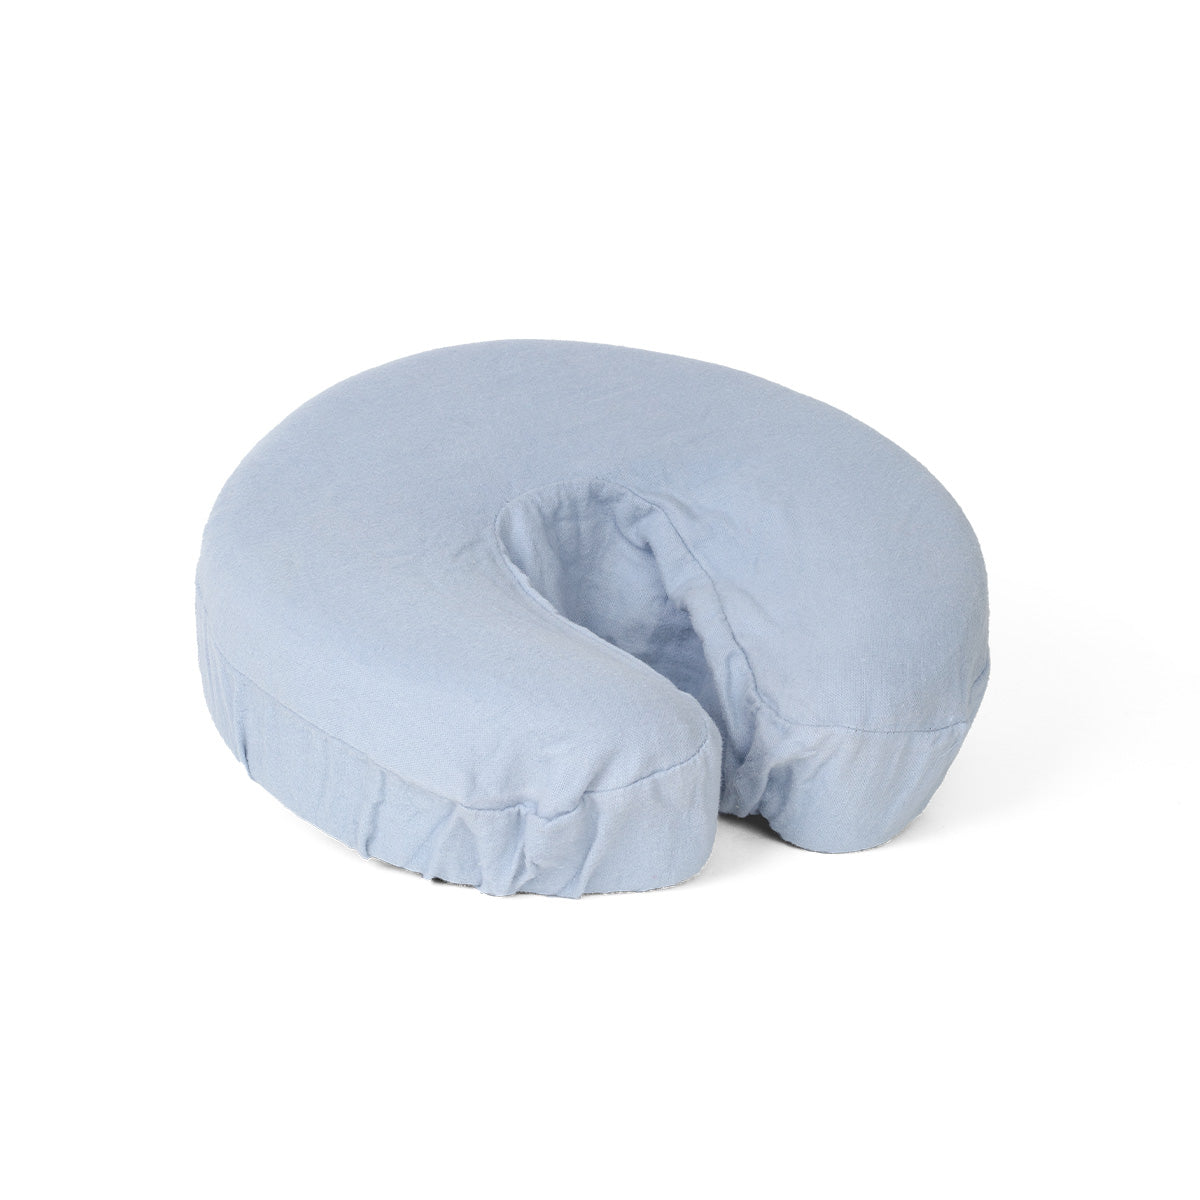 Fitted Headrest Cover, 100% Cotton Flannel